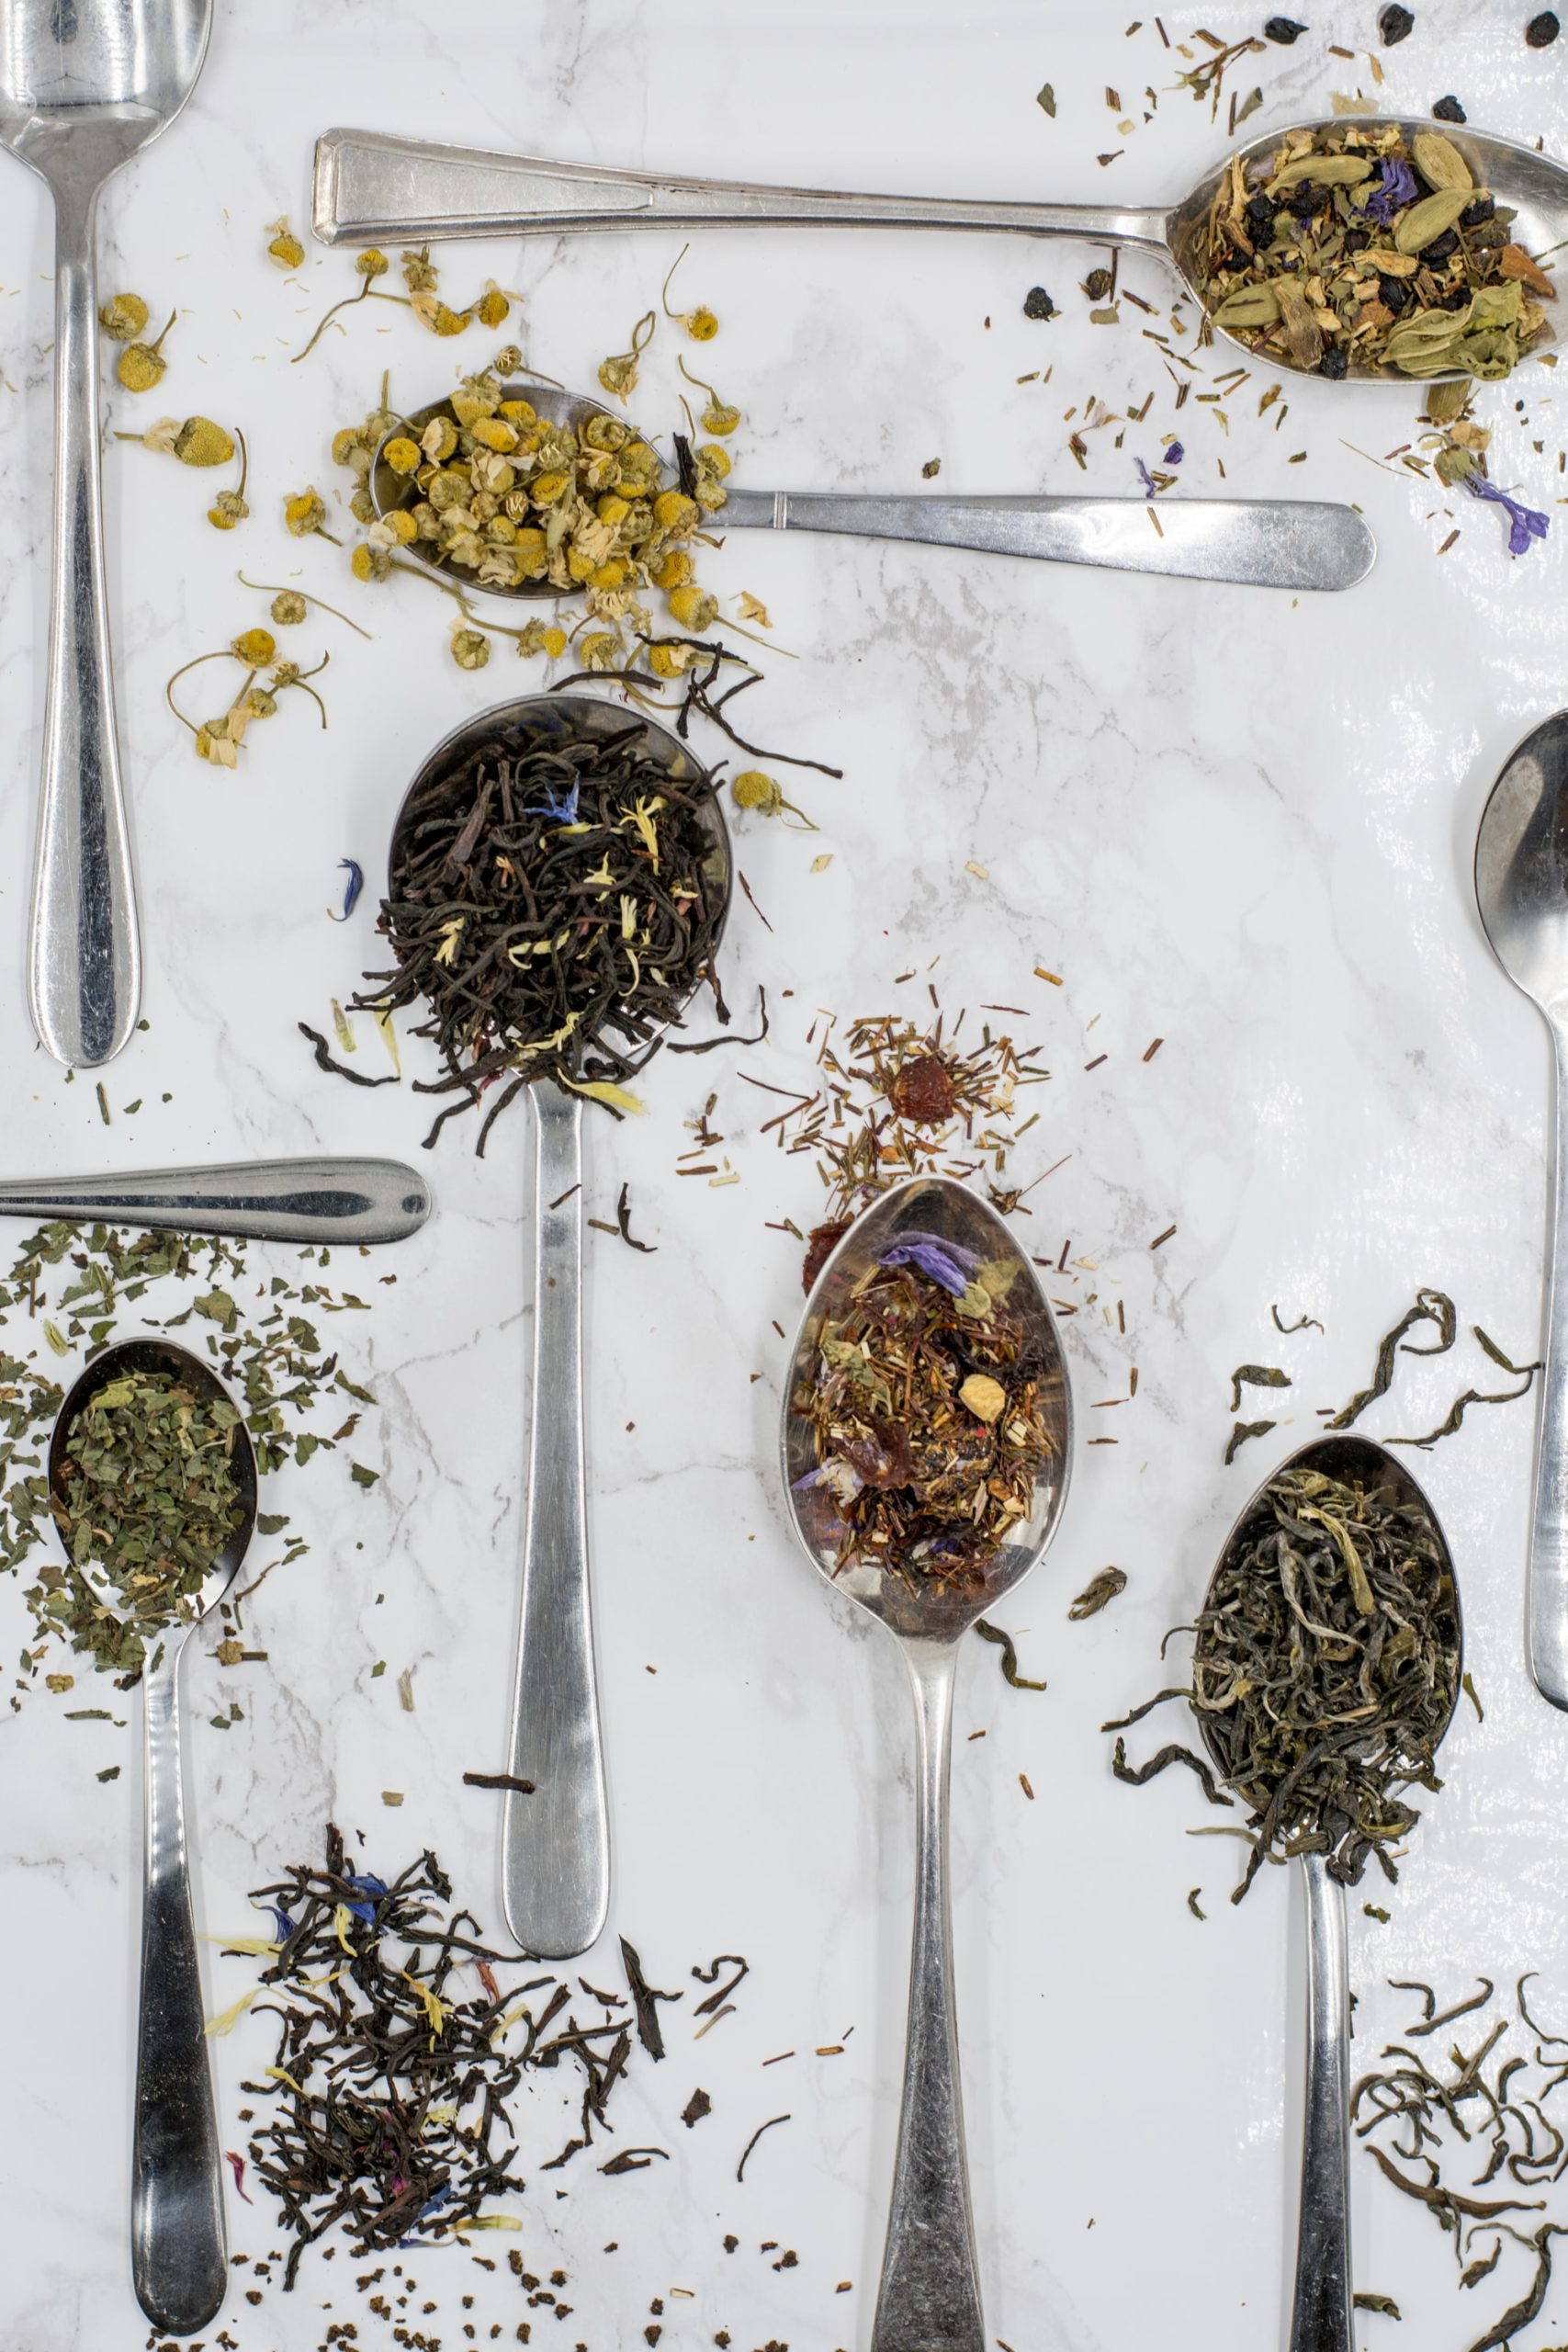 Gifts From Your Garden: Grow Your Own Herbal Teas